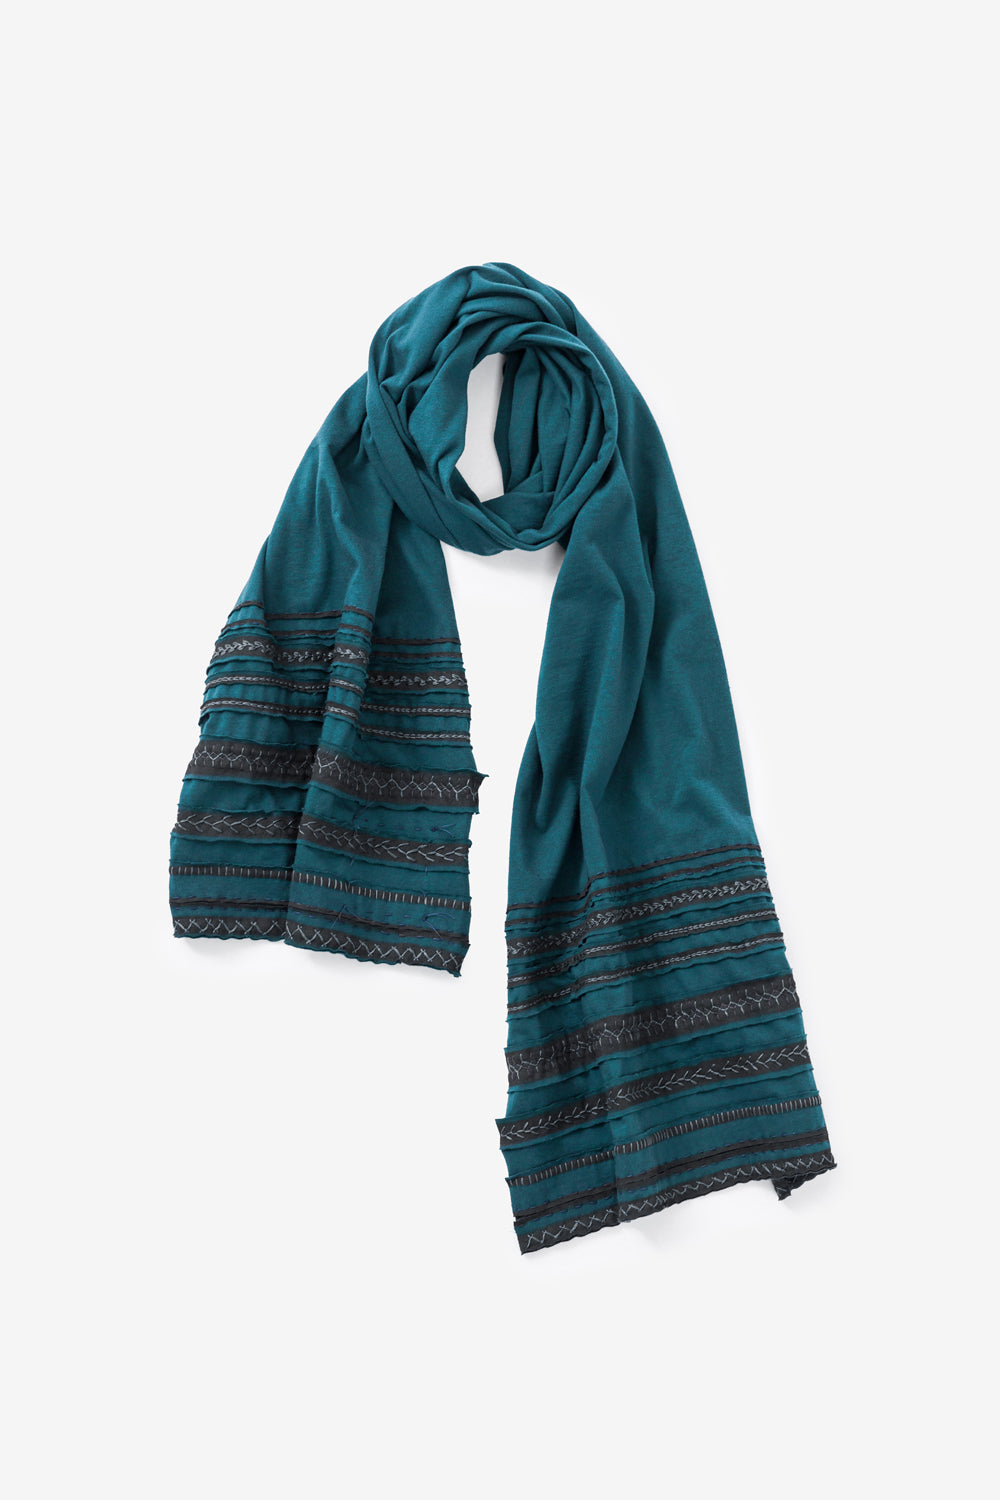 The School of Making Stripe Scarf in Teal with Variegated stencil design.